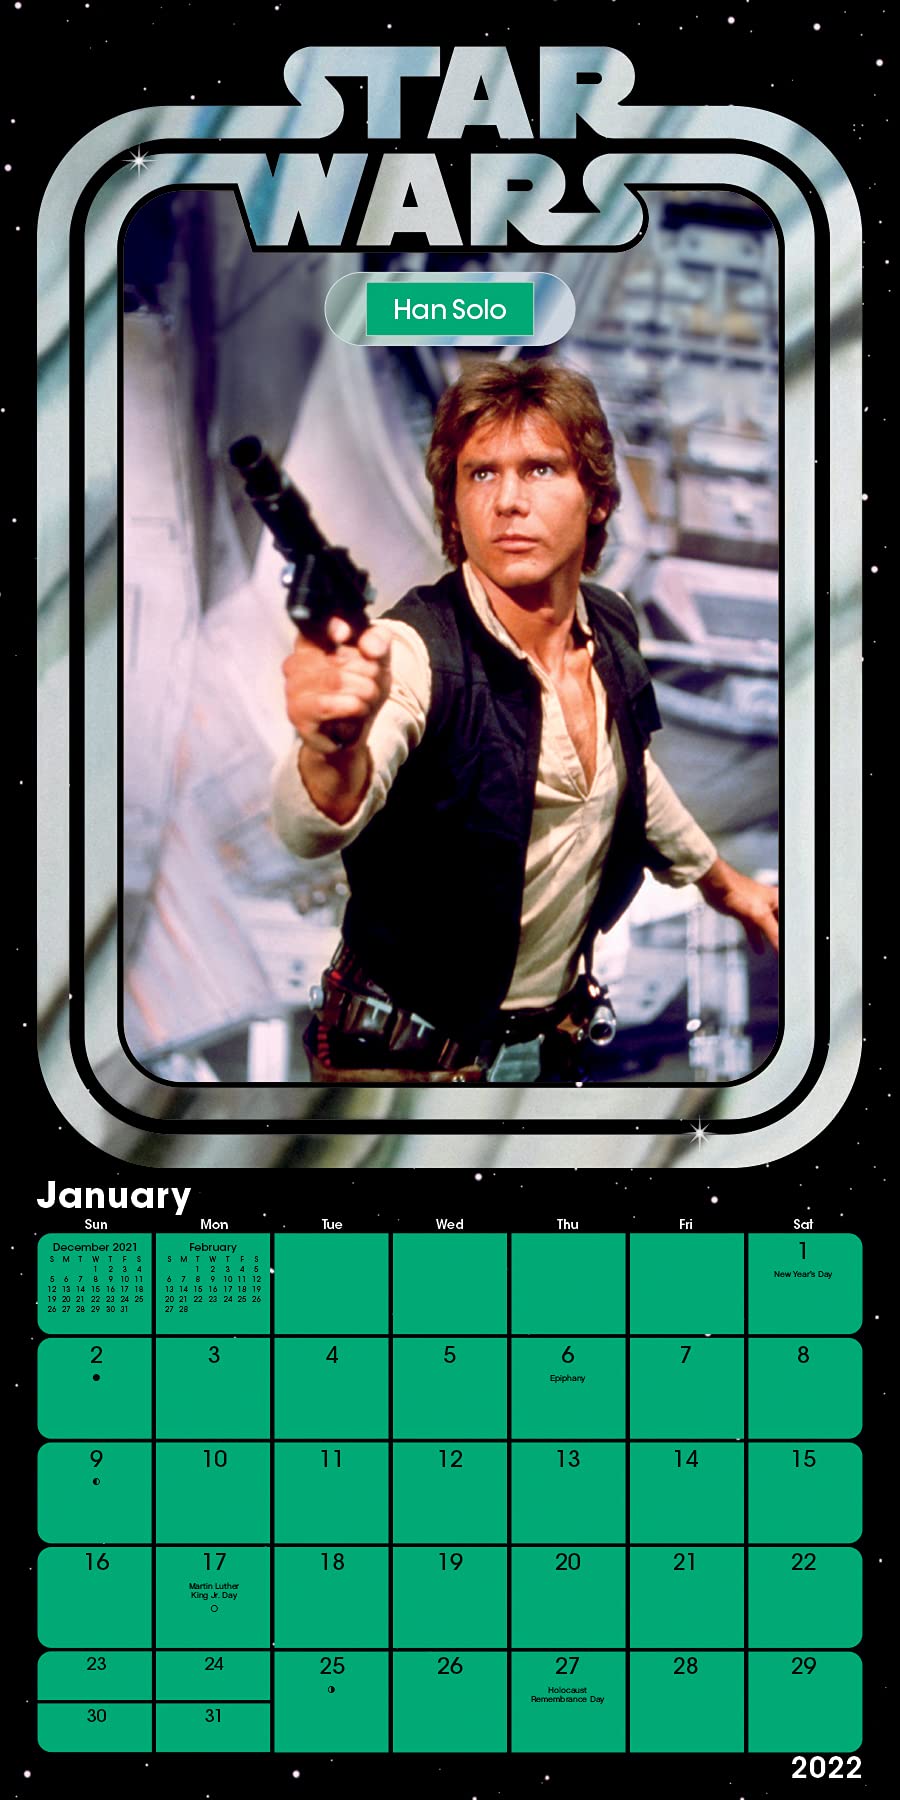 The Official Star Wars Classic Square Calendar 2022 